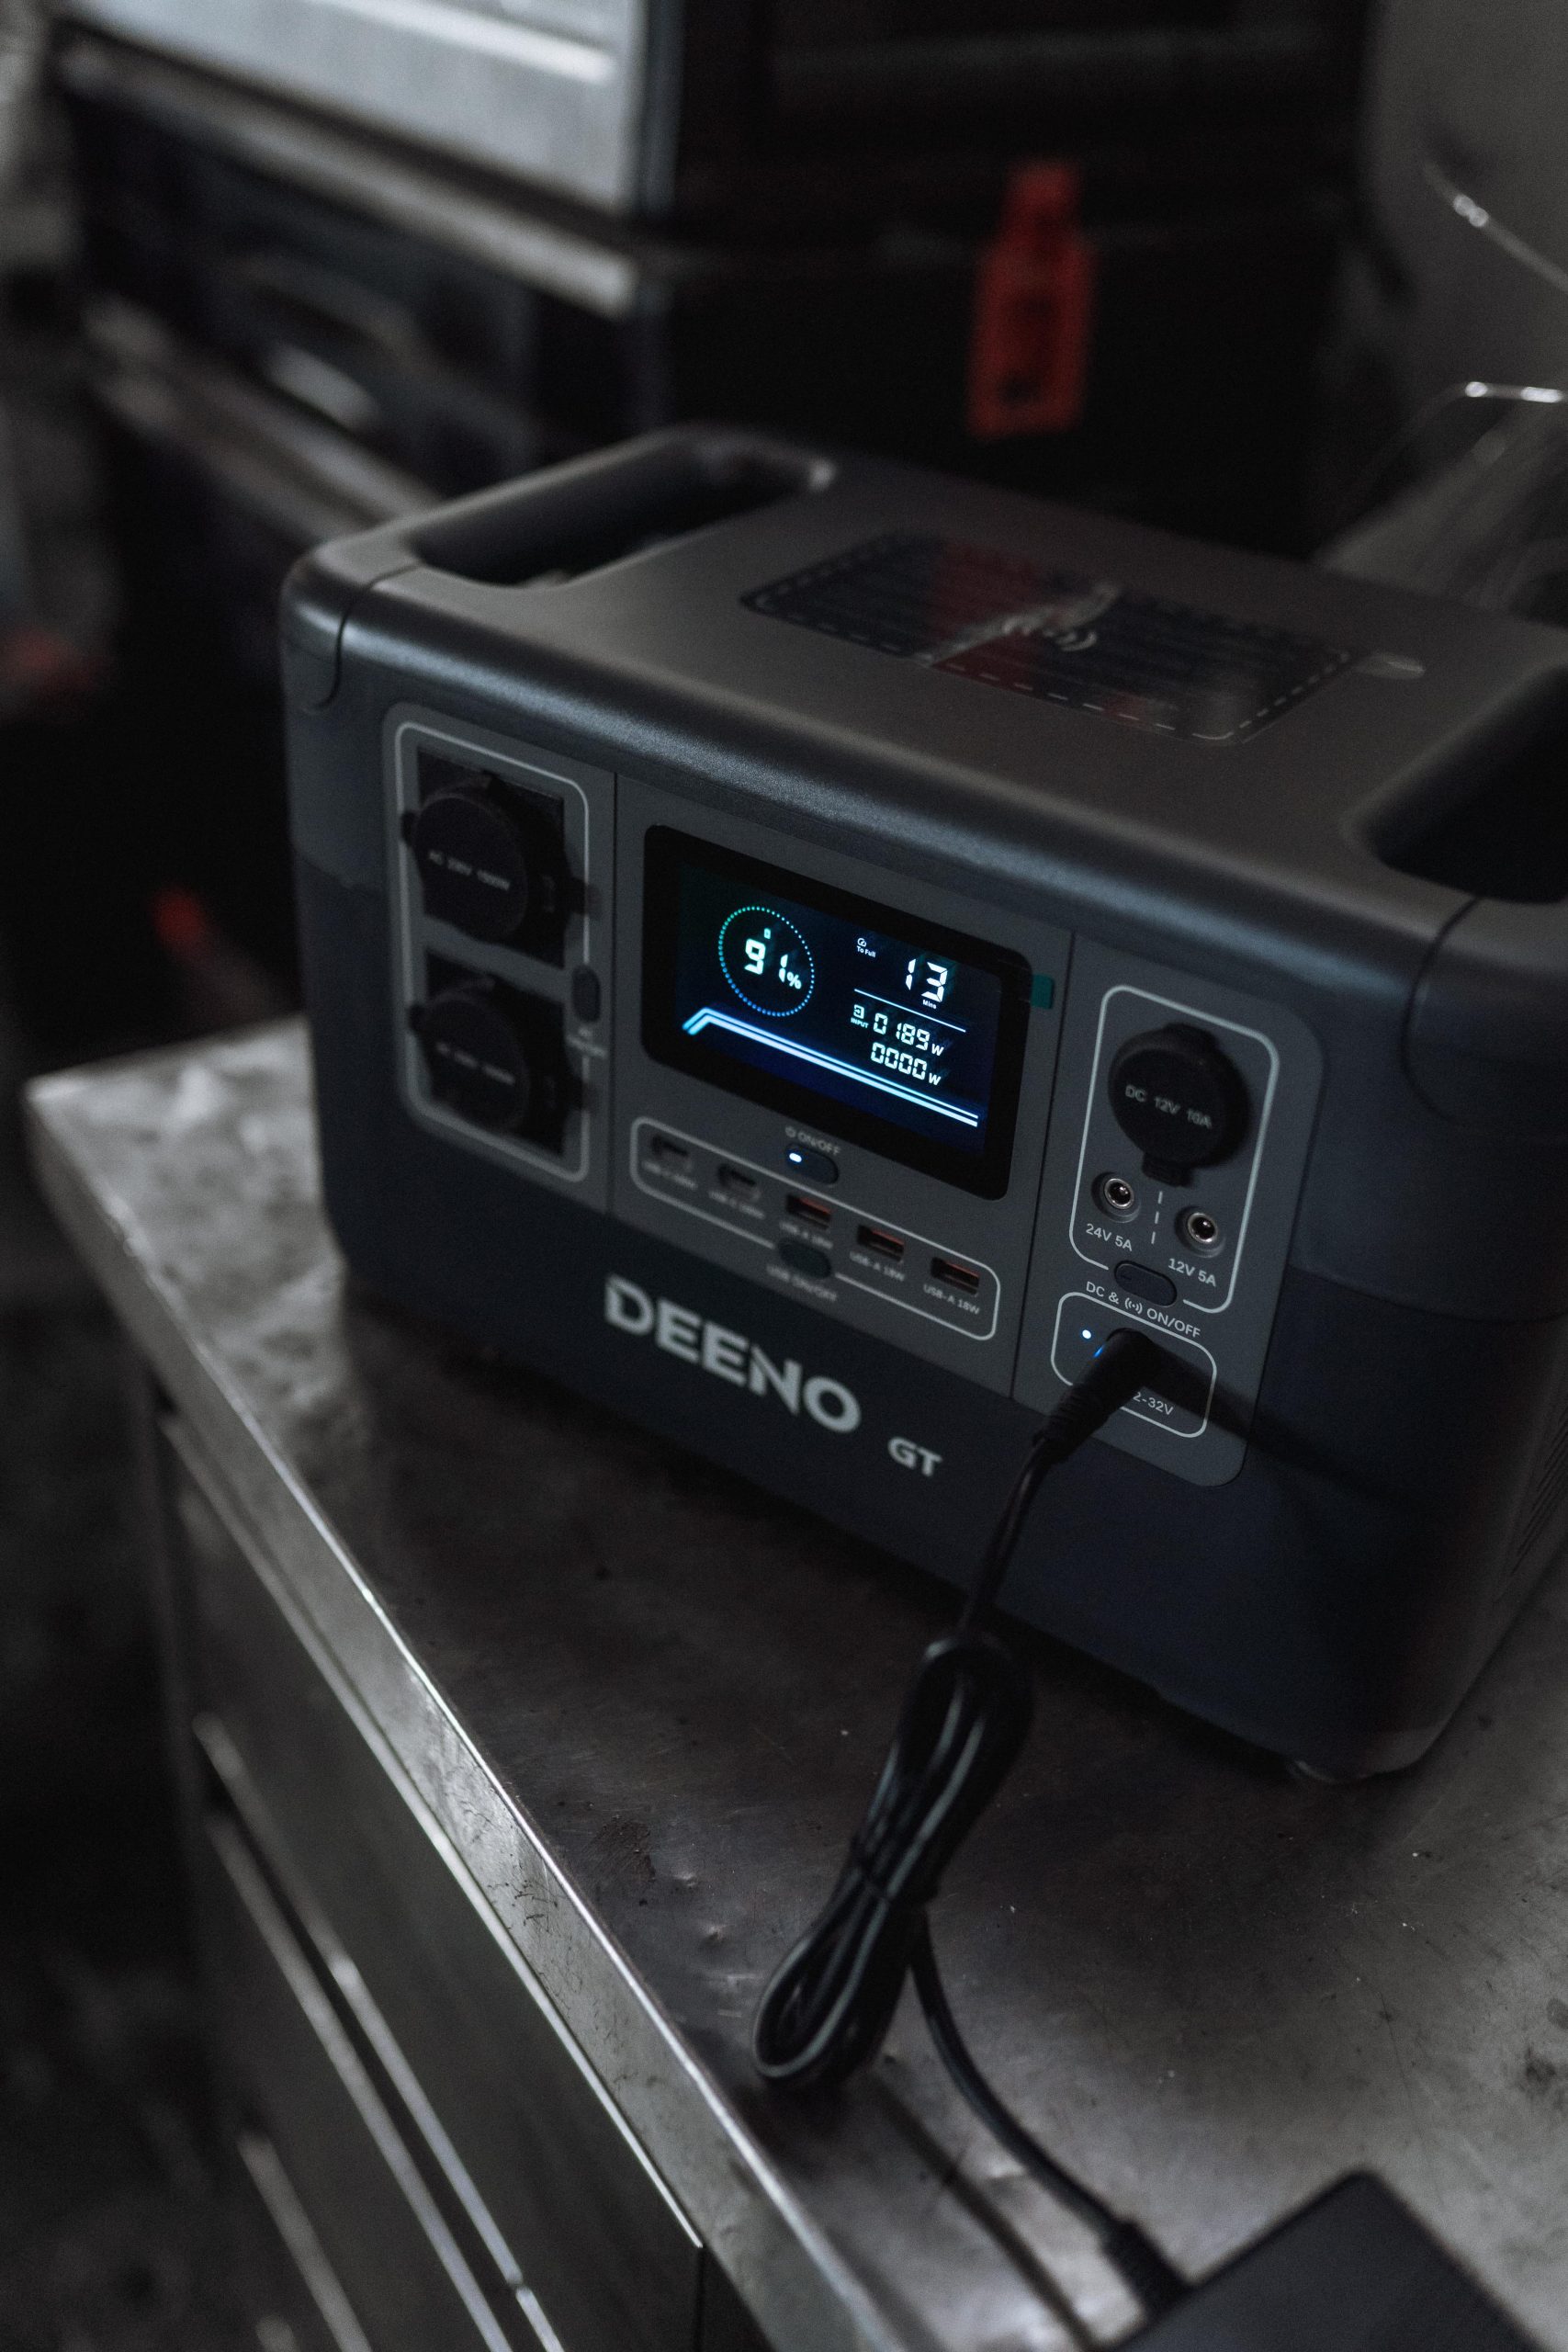 Charging station Deeno X1500 from the company named Enterra